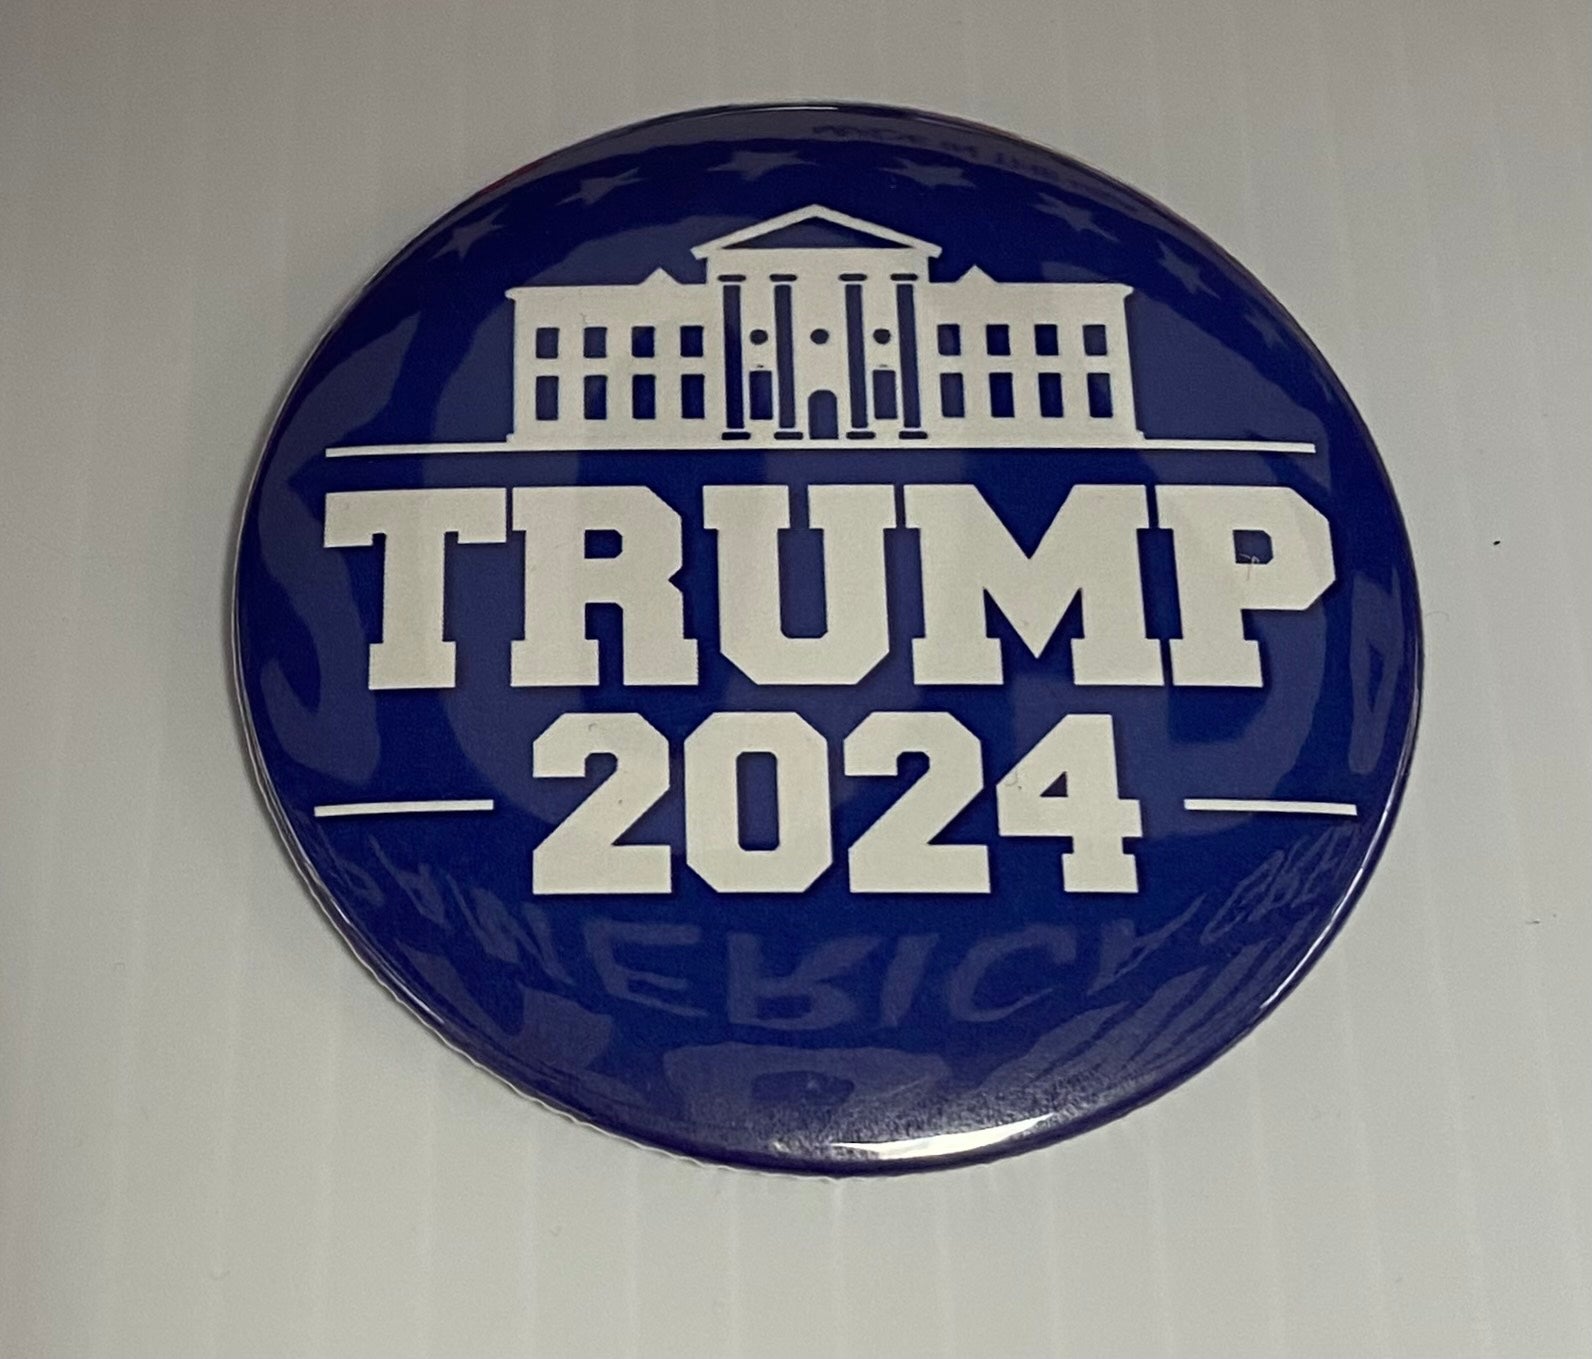 Trump 2024 3-inch collectible button pins